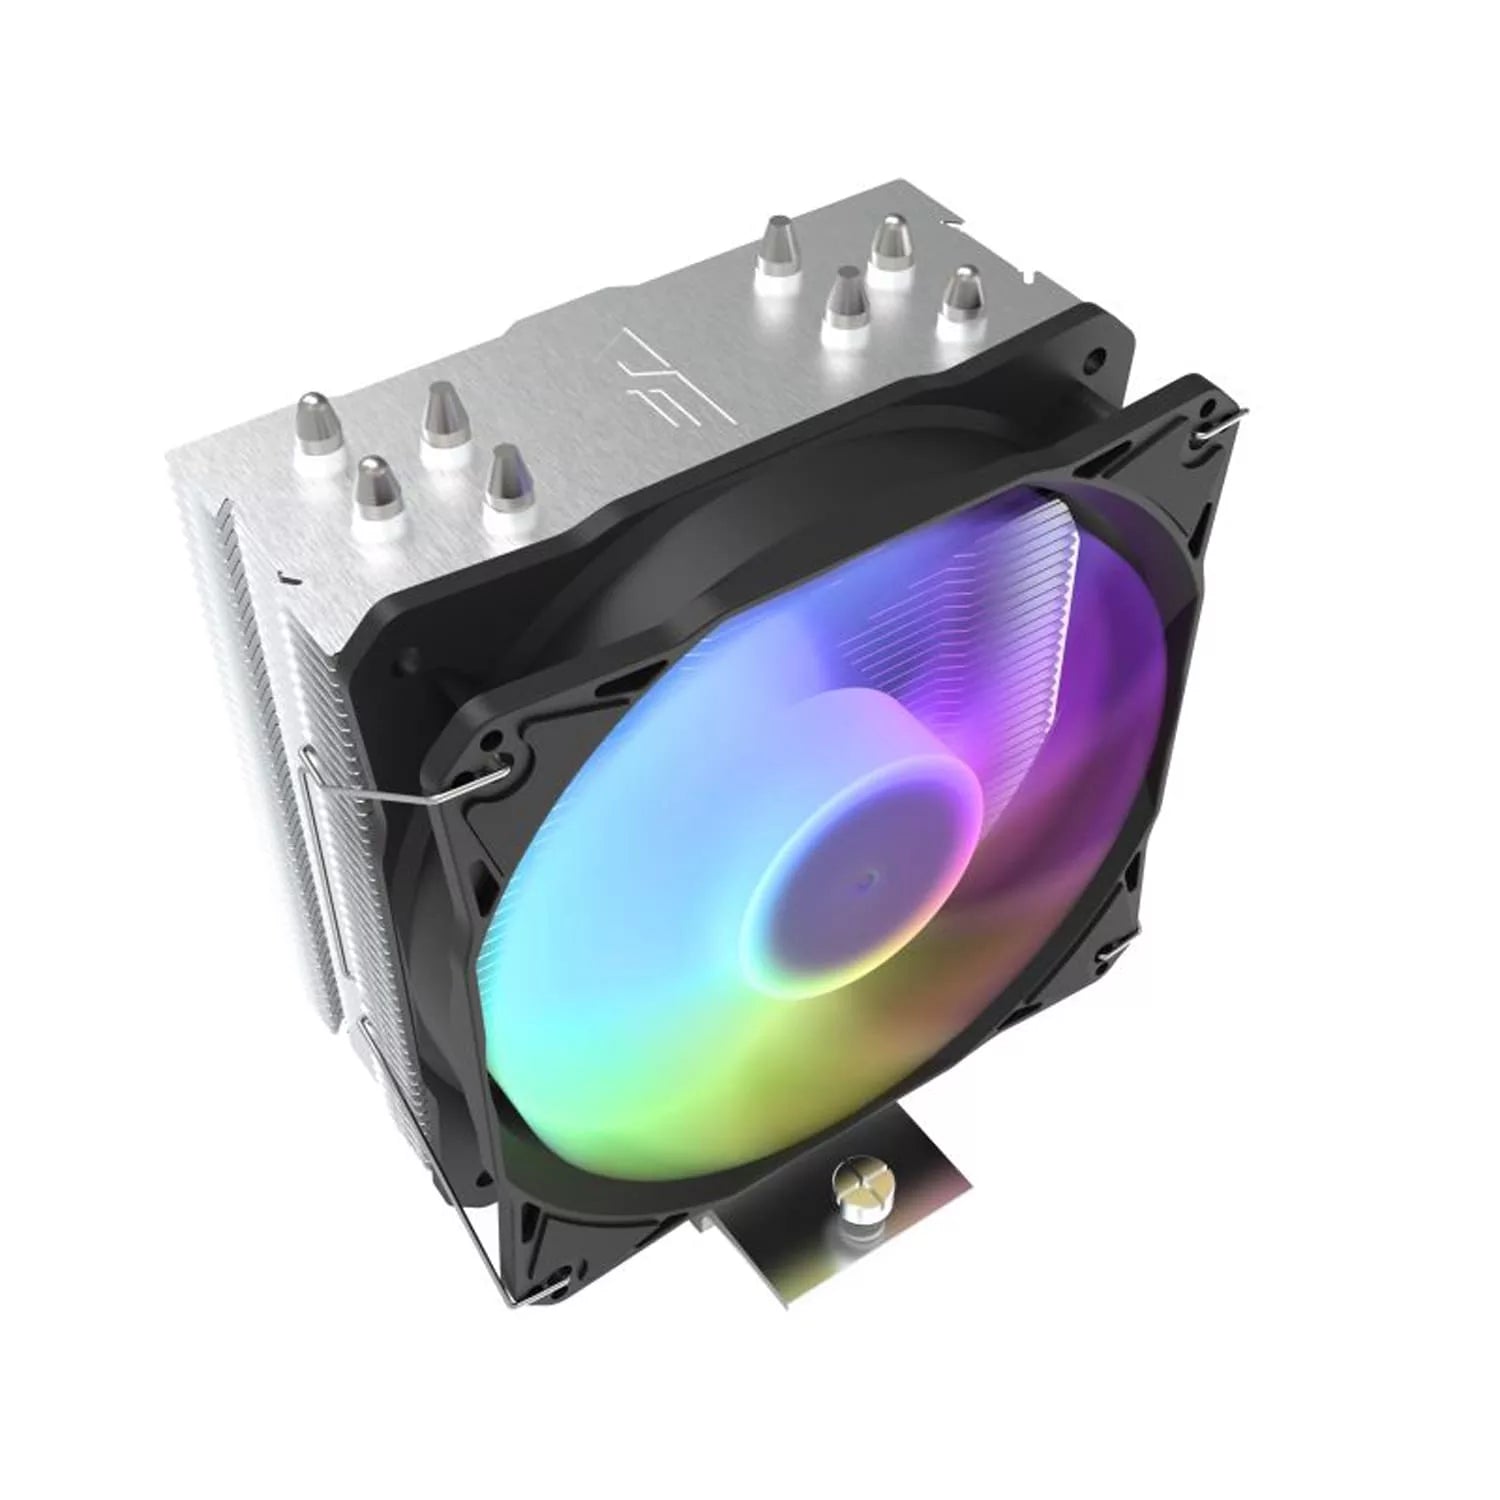 DarkFlash Z4 ARGB CPU Air Cooler: 4 Heat Pipes, 120mm ARGB Fan, Affordable Performance and Style